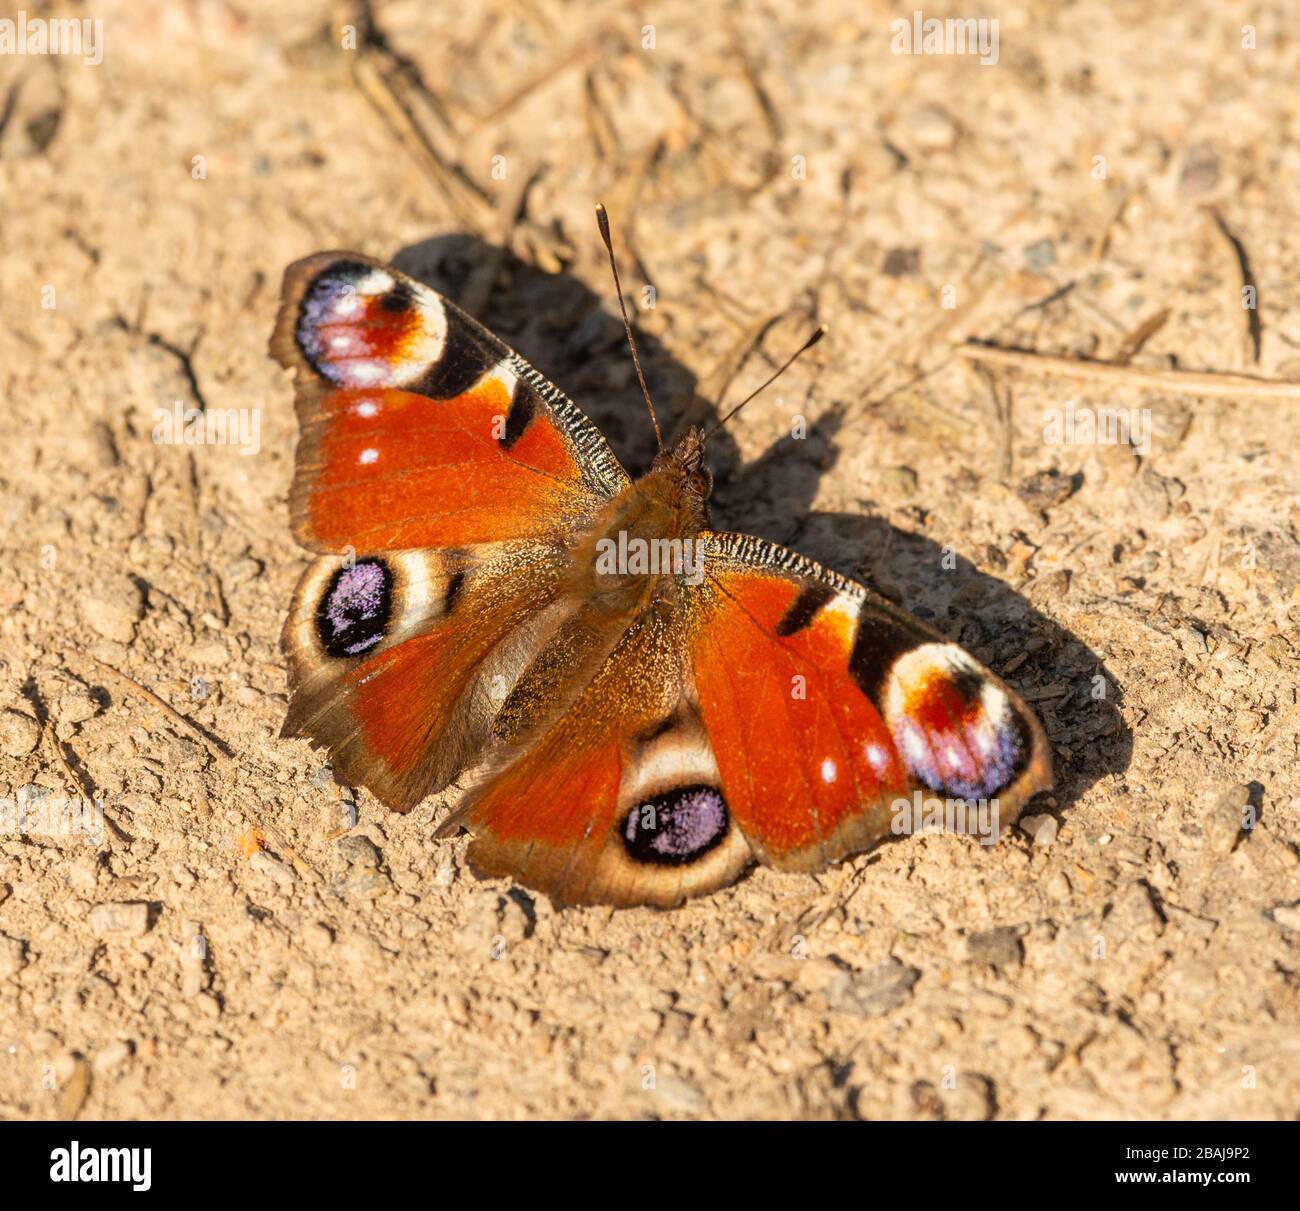 peacock butterfly (Aglais io) sitting opened on the ground, animal insect macro Stock Photo